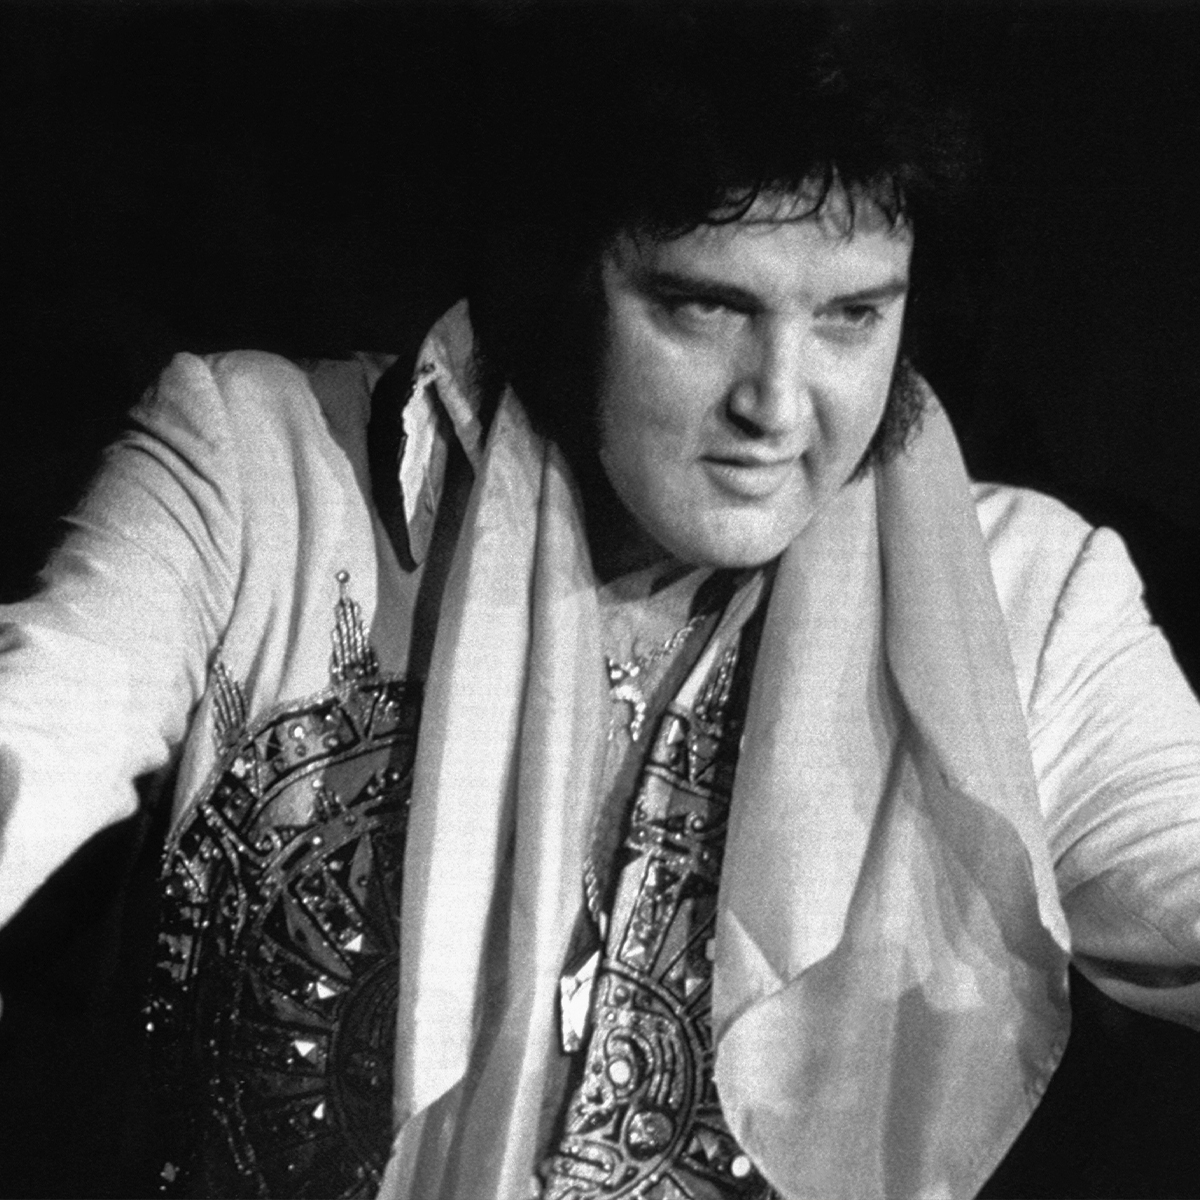 Why Elvis Presley’s Death Continues to Stir Conspiracy Theories